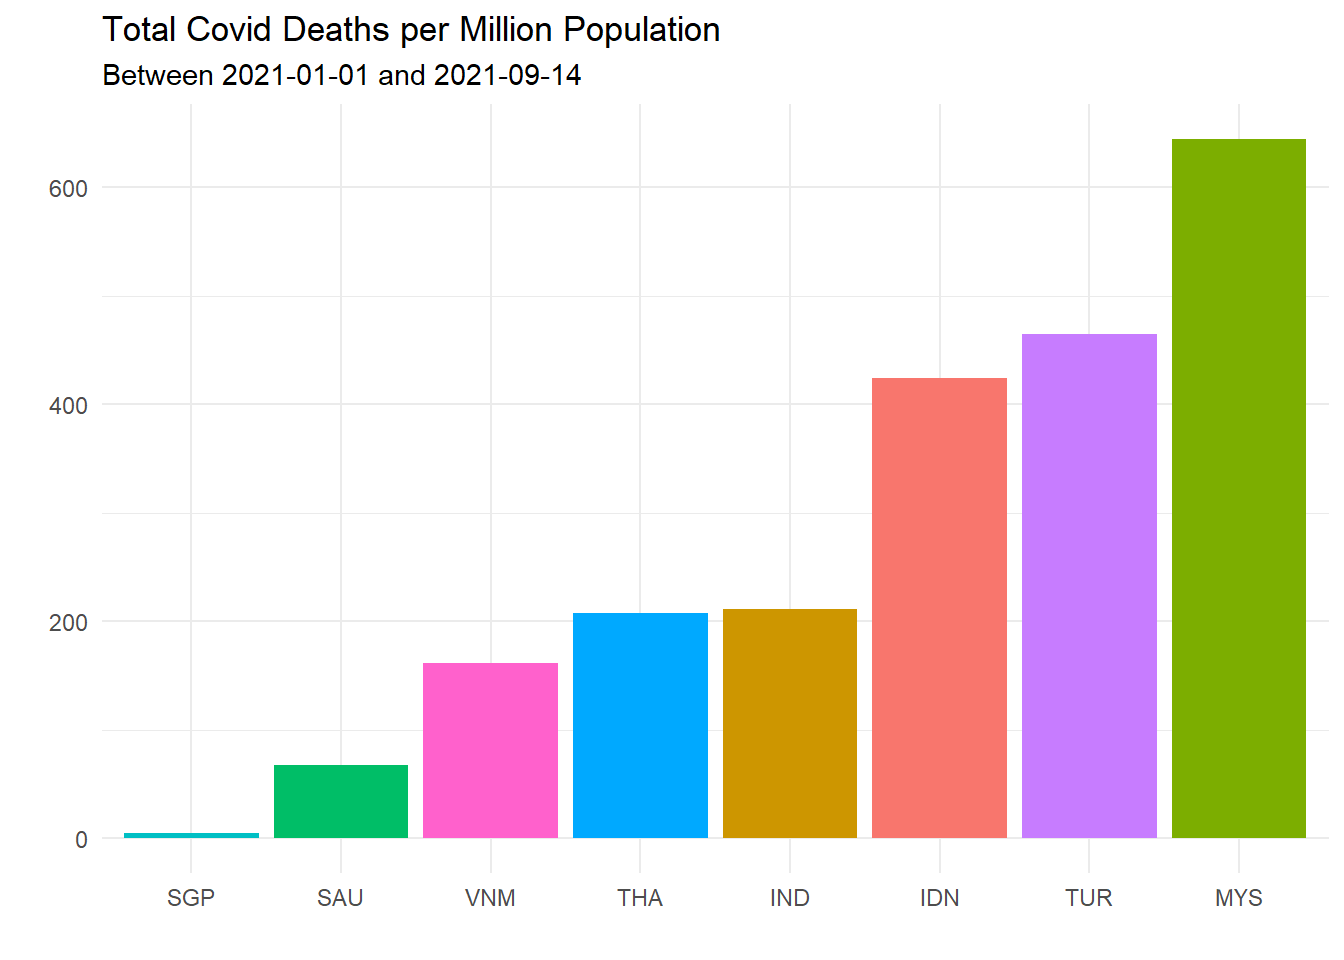 Total Covid deaths per million population for selected countries